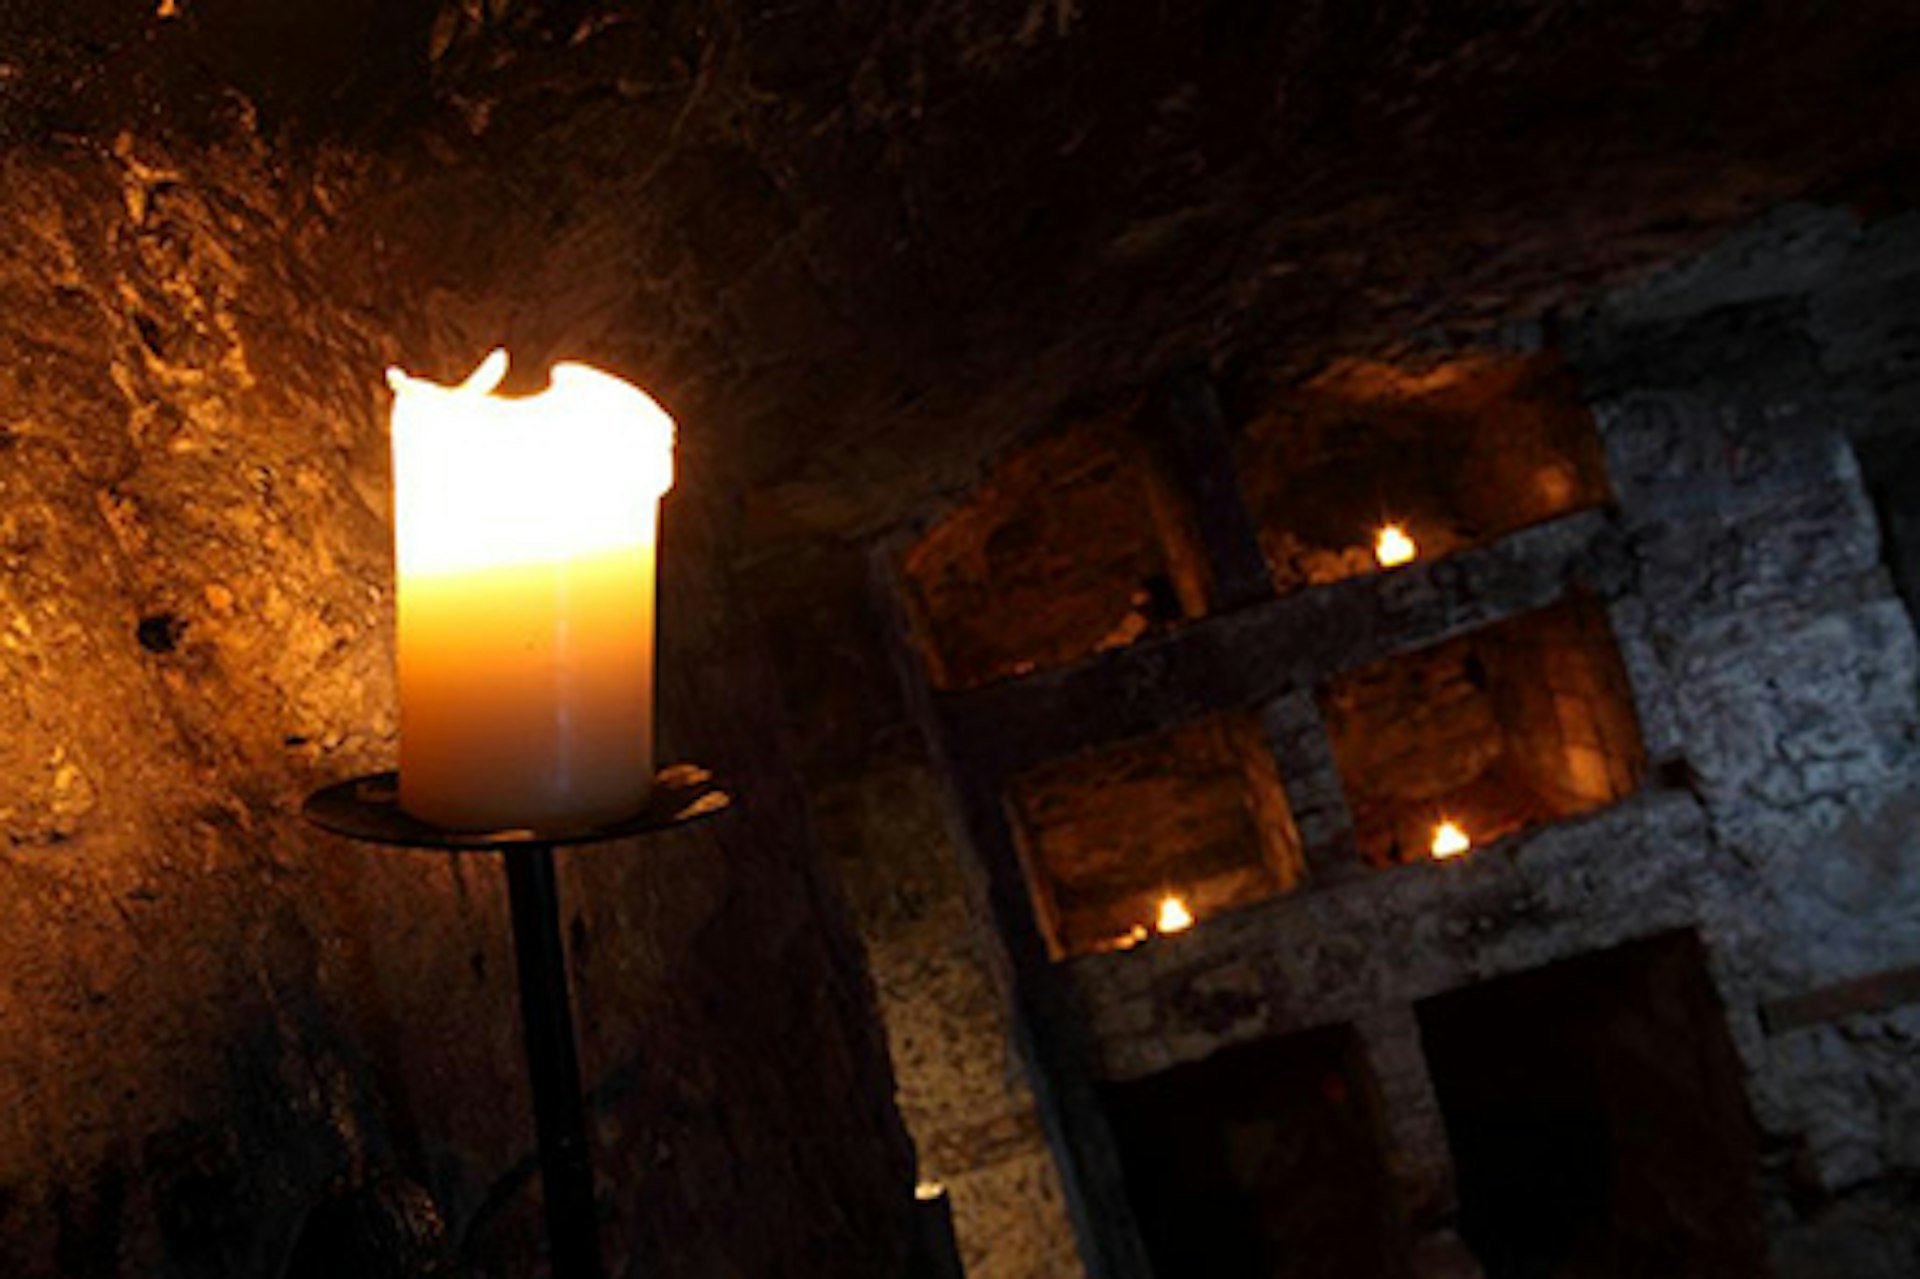 Hidden and Haunted Edinburgh Tour for Two